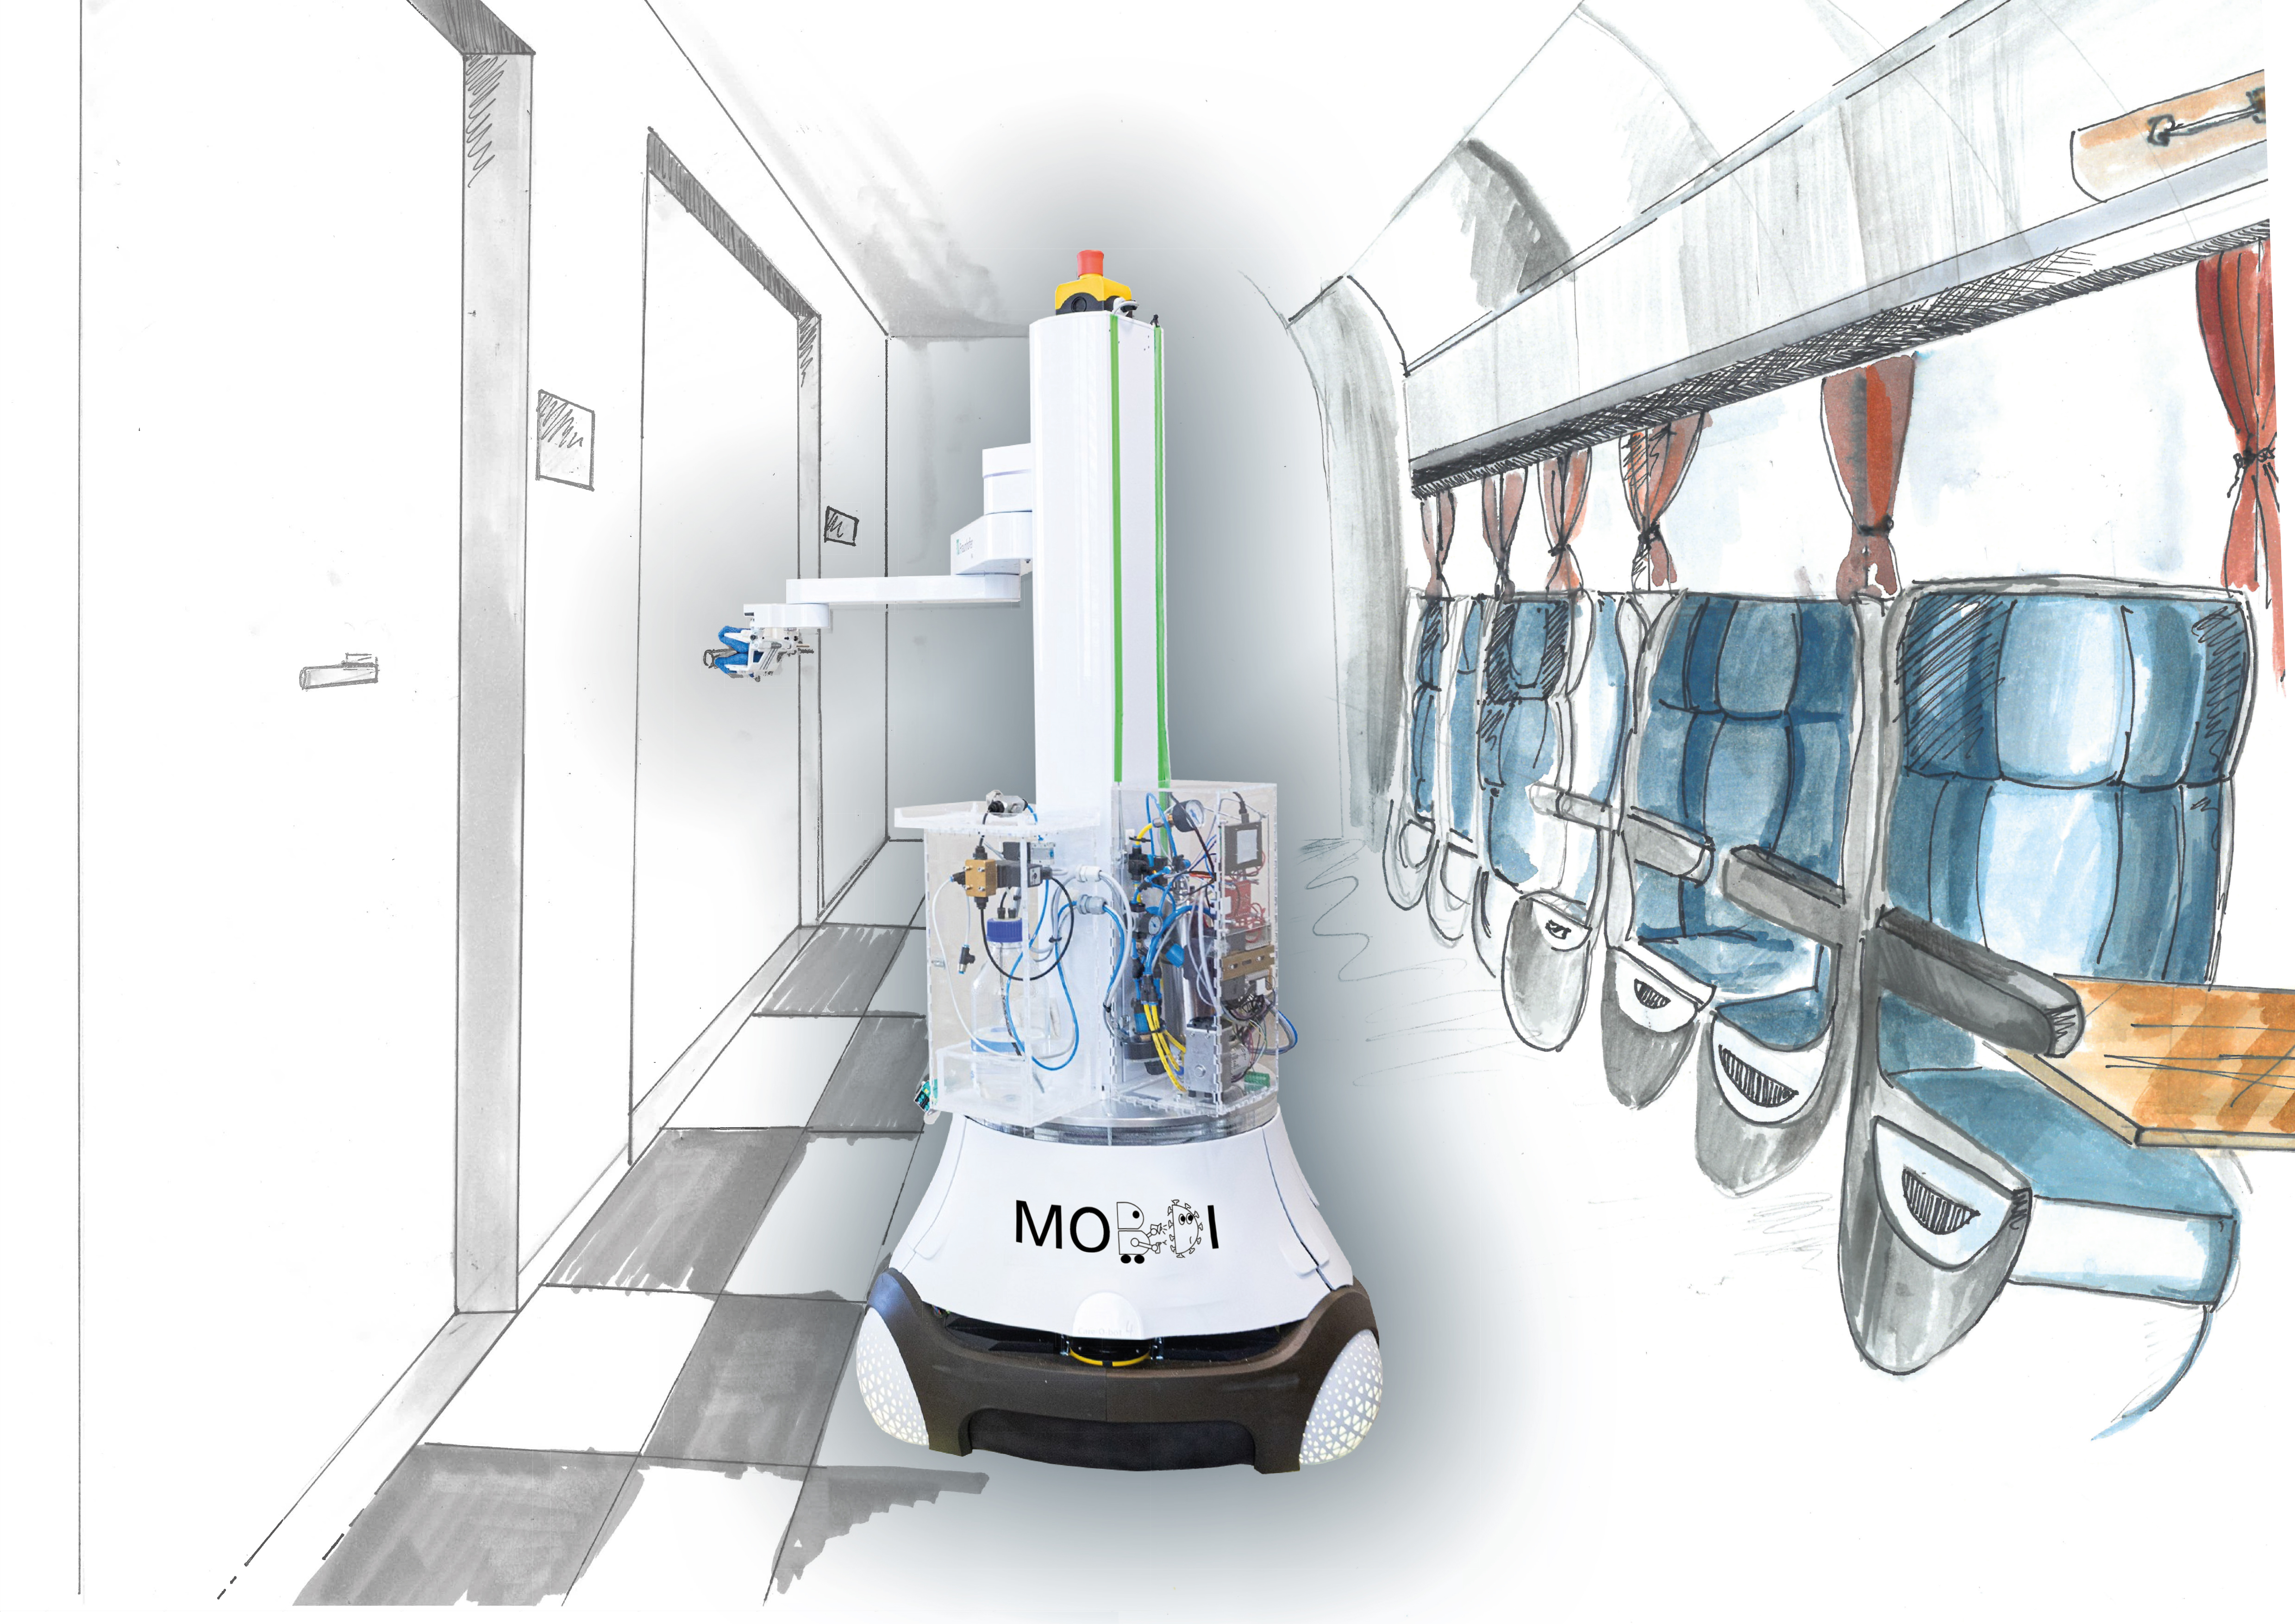 In the “MobDi” project, disinfection robots are being developed for use both in buildings (left side) and in transportation (right side). 